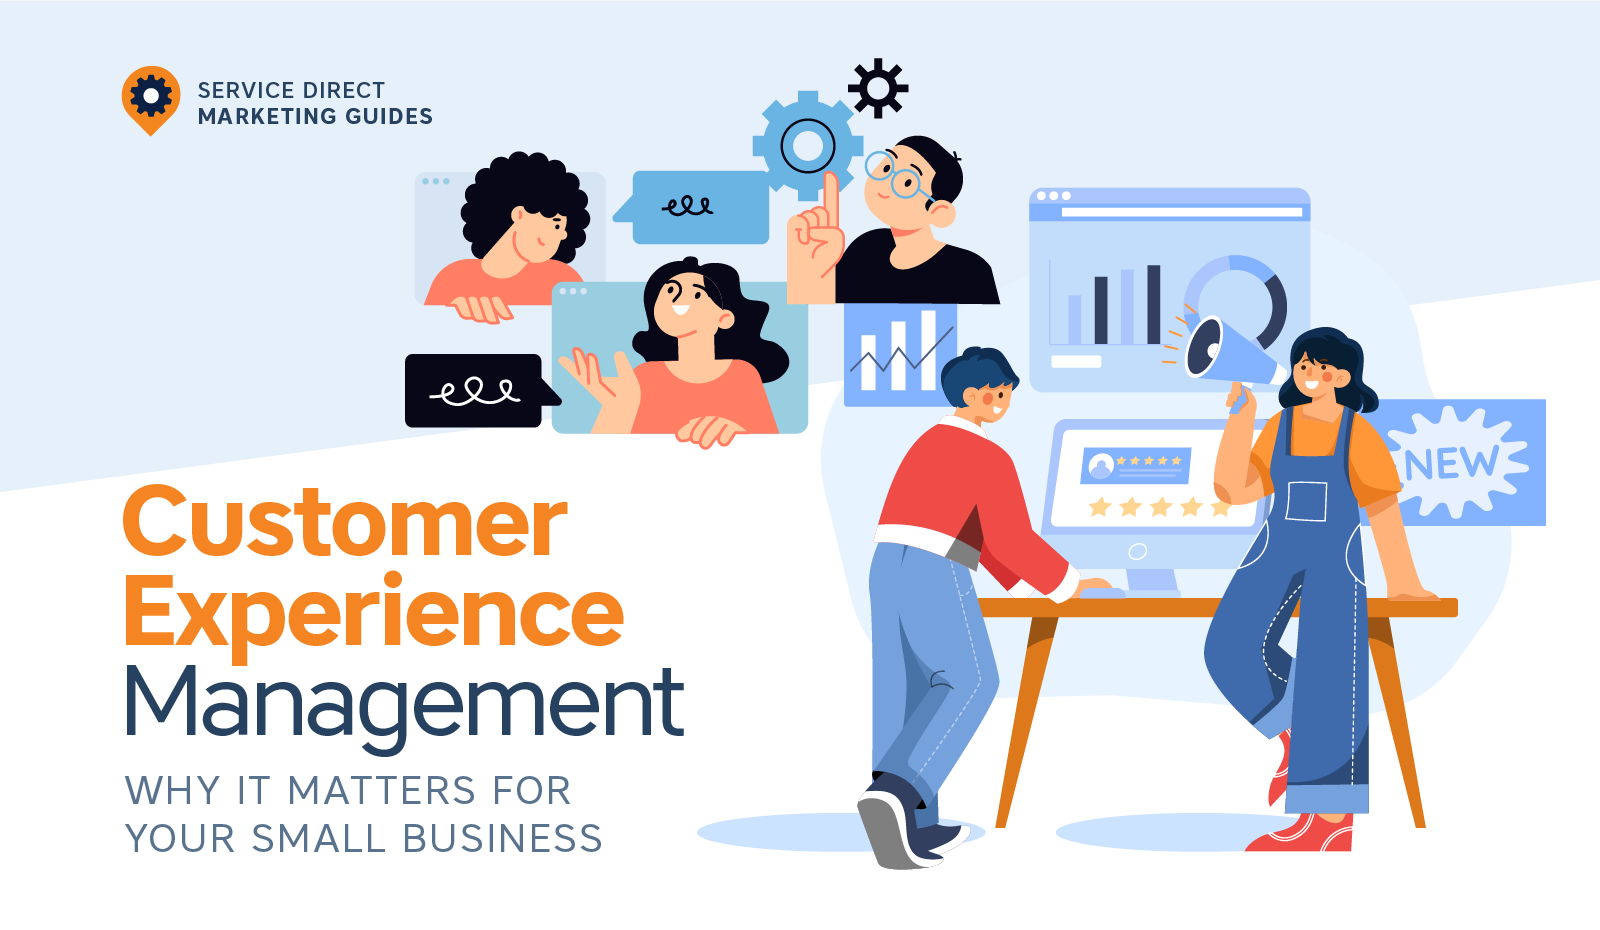 Customer Experience Management for Small Businesses